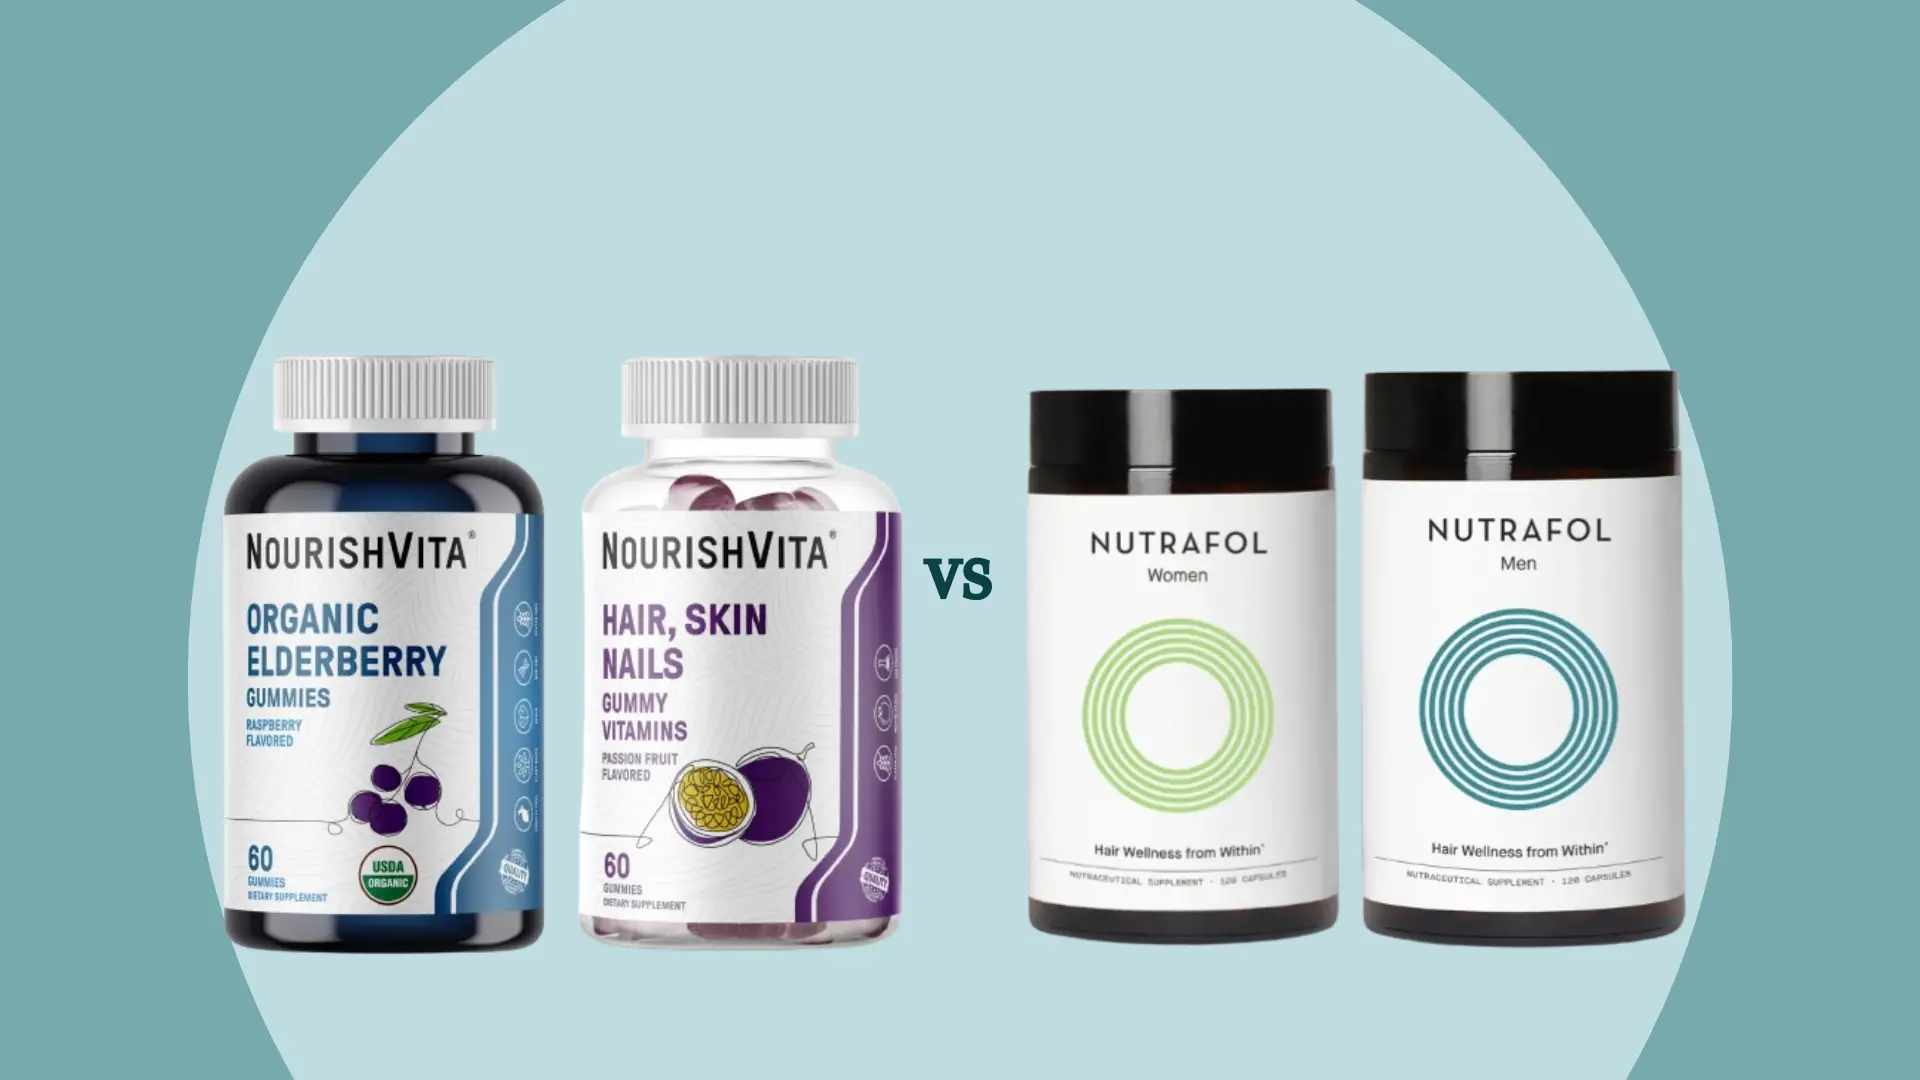 NourishVita Vs Nutrafol: Which One Is Better For Your Hairs?